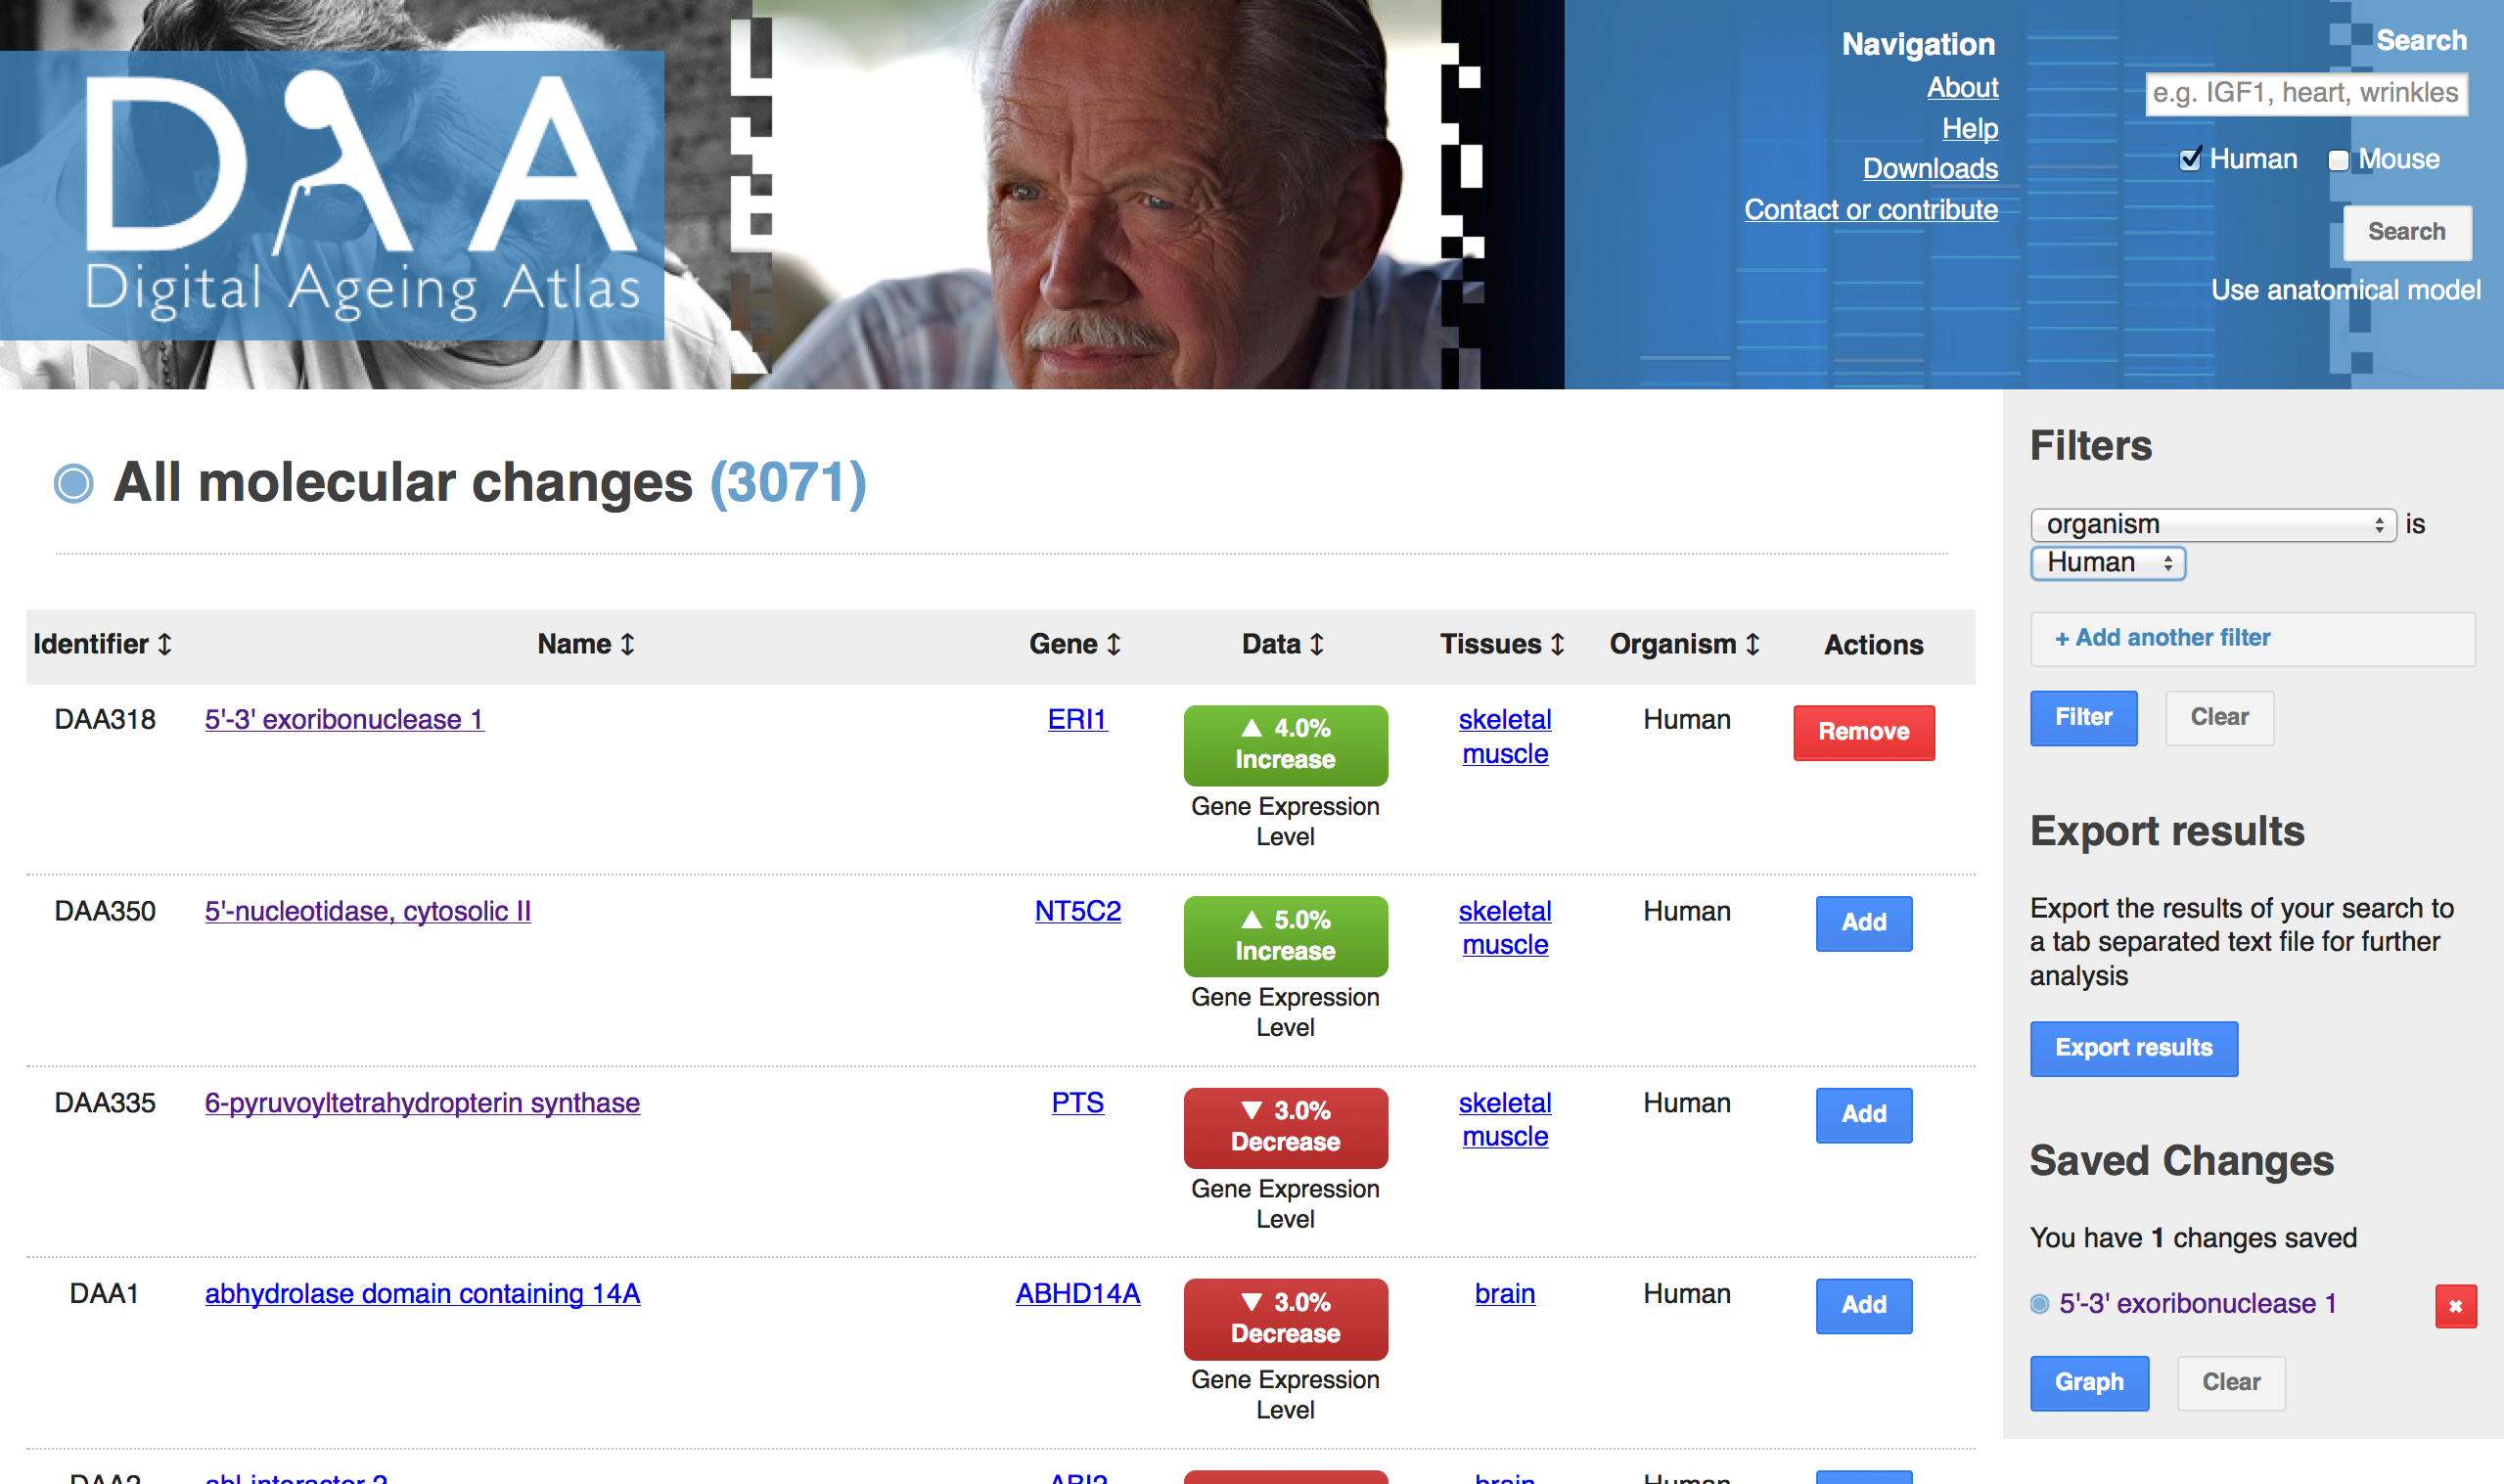 The Digital Ageing Atlas search results page